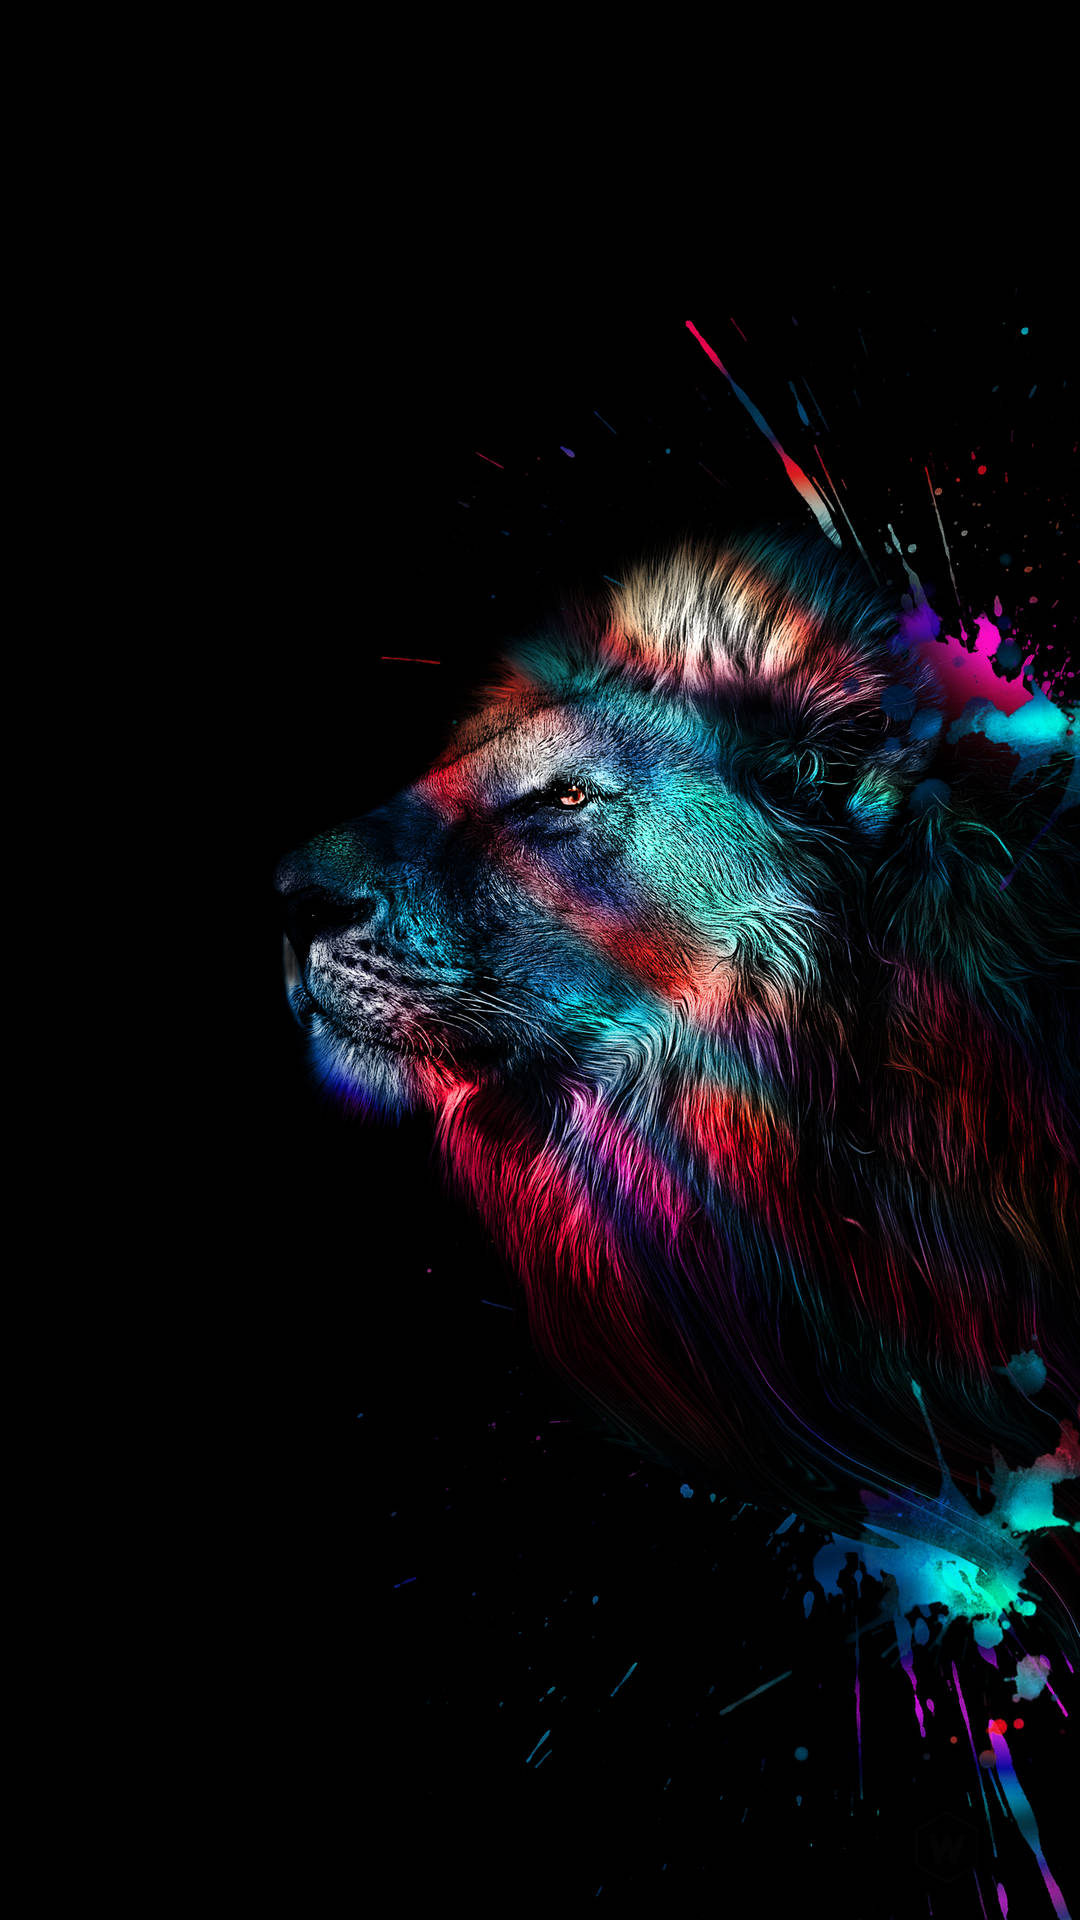 A Colorful Lion Head On A Black Background Wallpaper